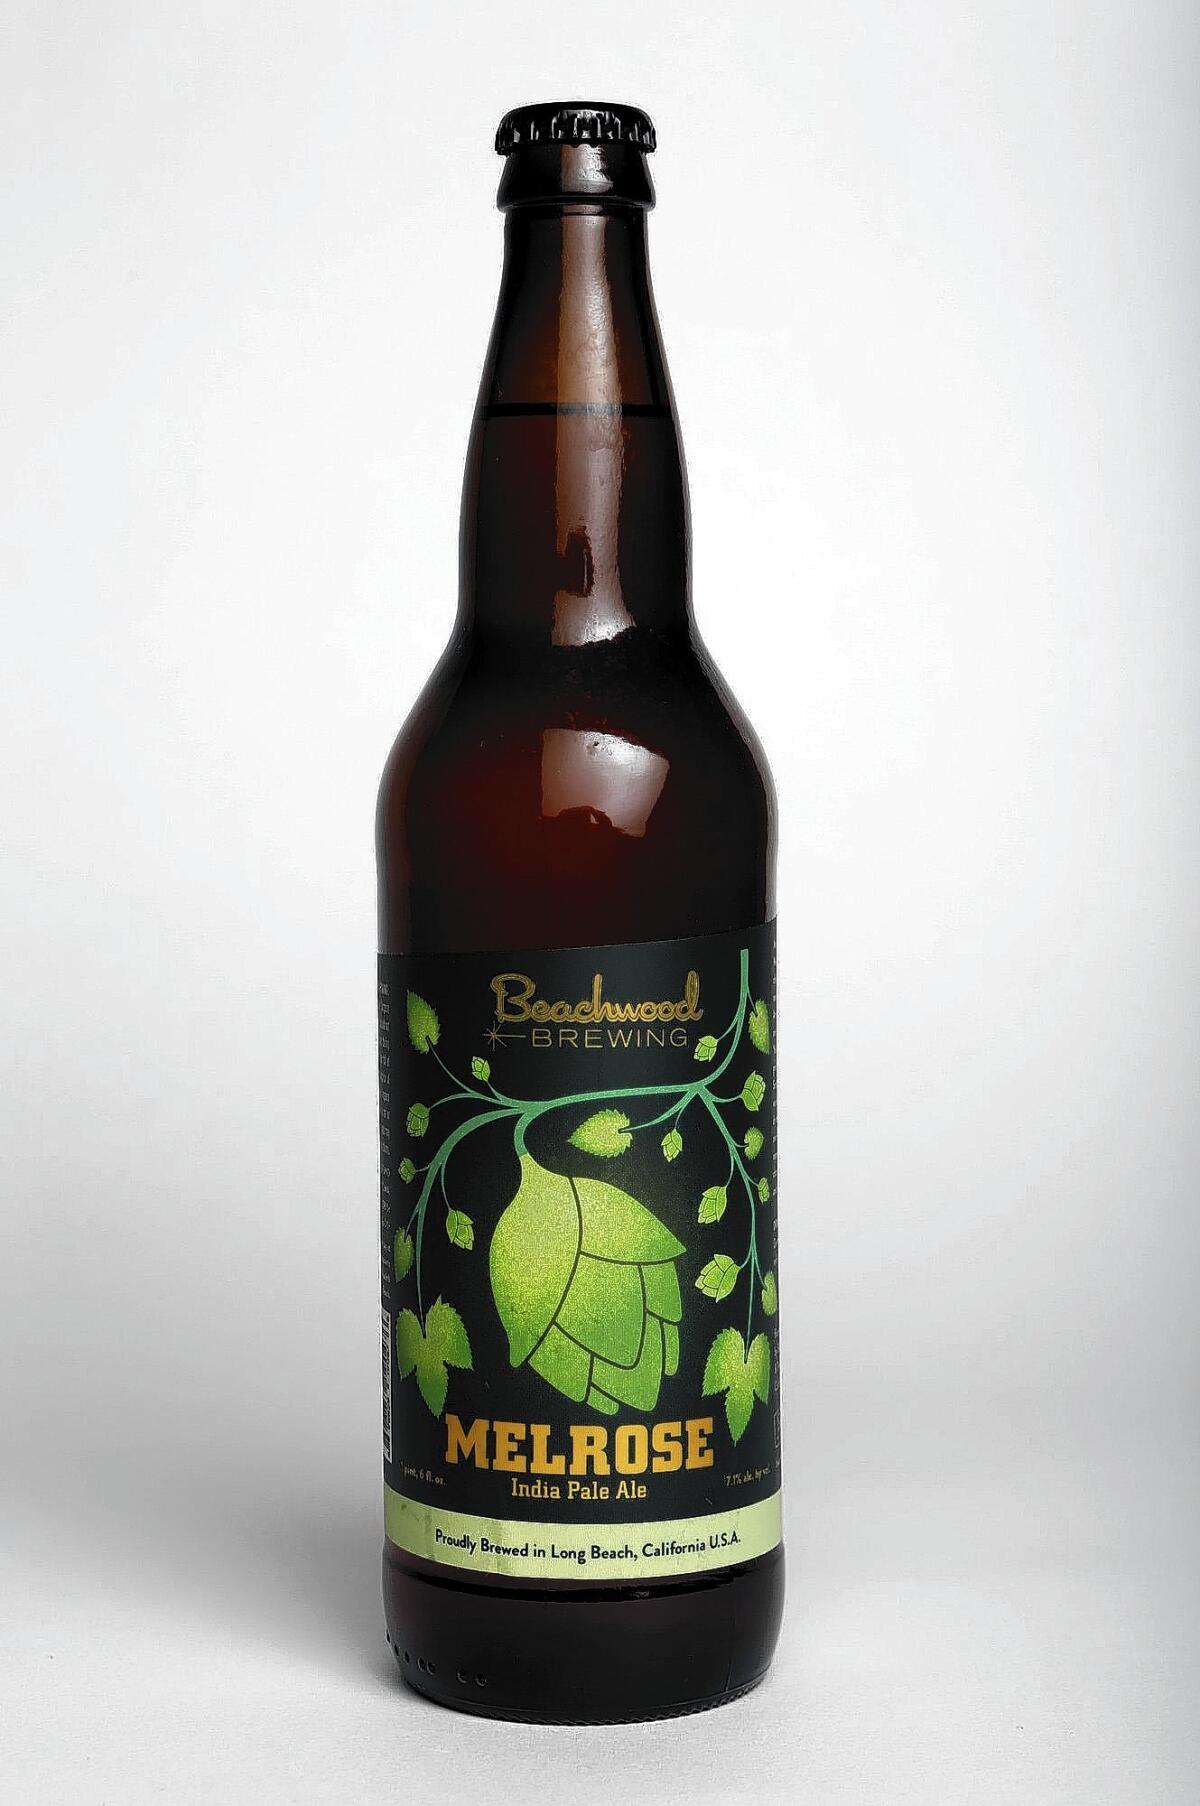 Melrose India Pale Ale from Beachwood Brewing.